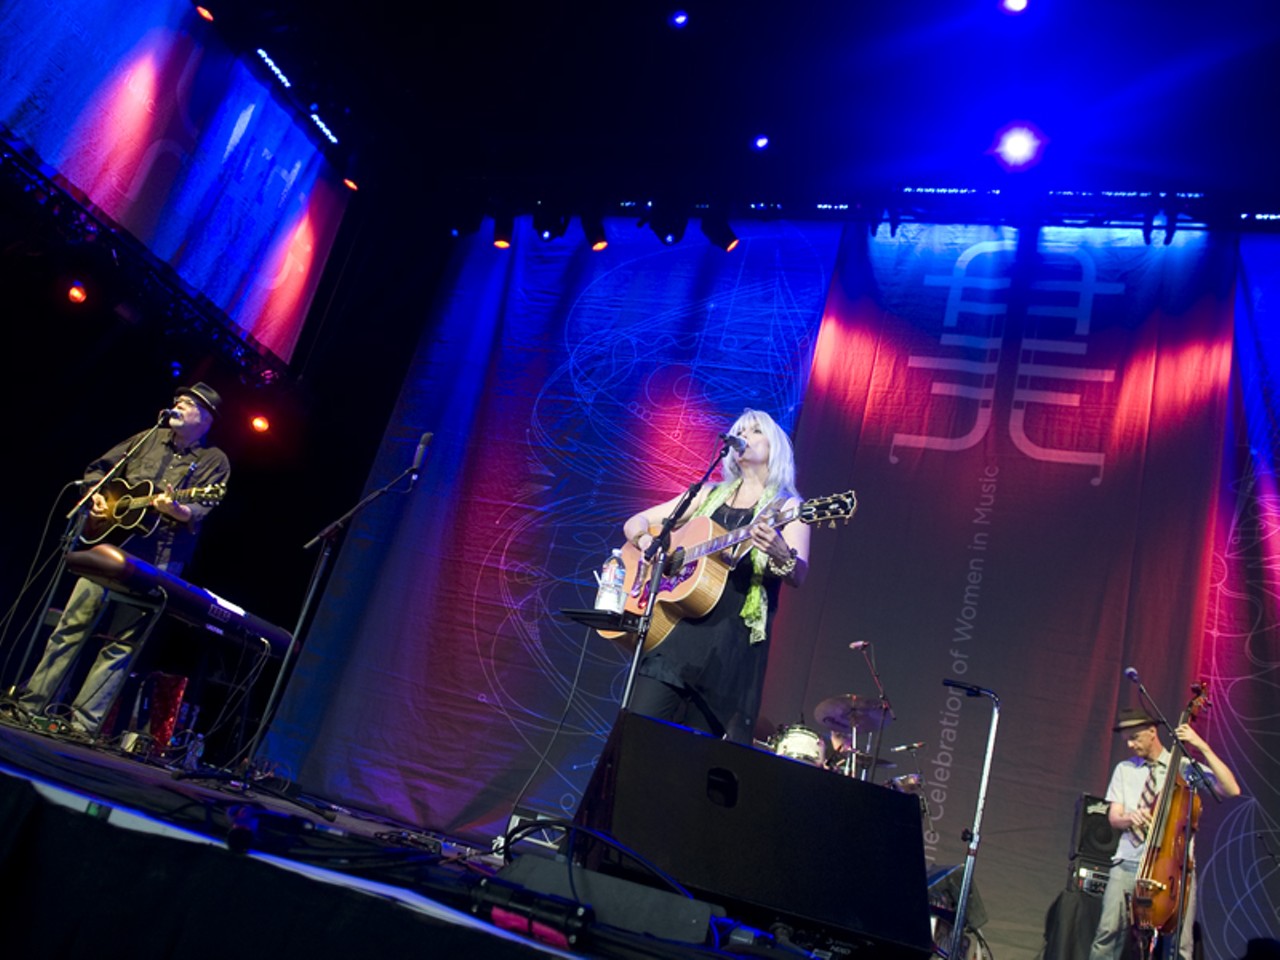 Emmylou Harris at the Lilith Fair in St. Louis.